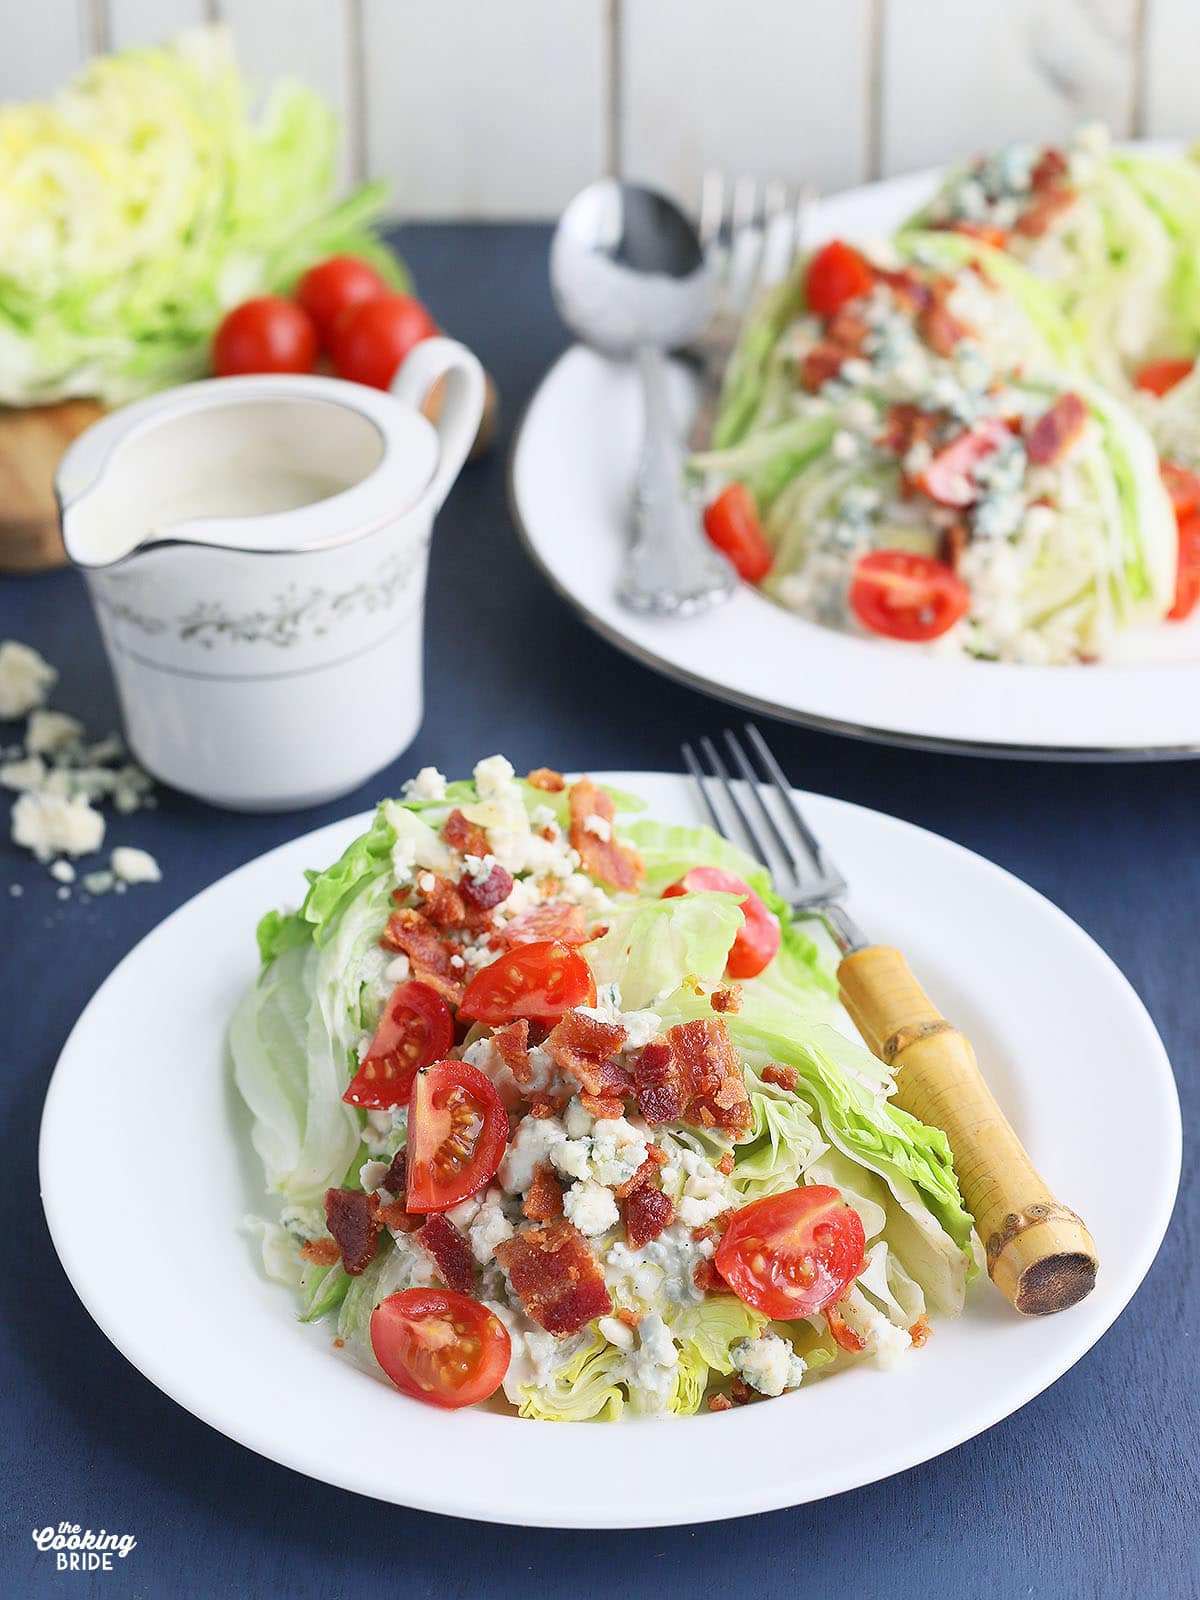 side view of a plated wedge salad with a small pitcher of dressing, platter of unserved salads and iceberg lettuce wedges in the background